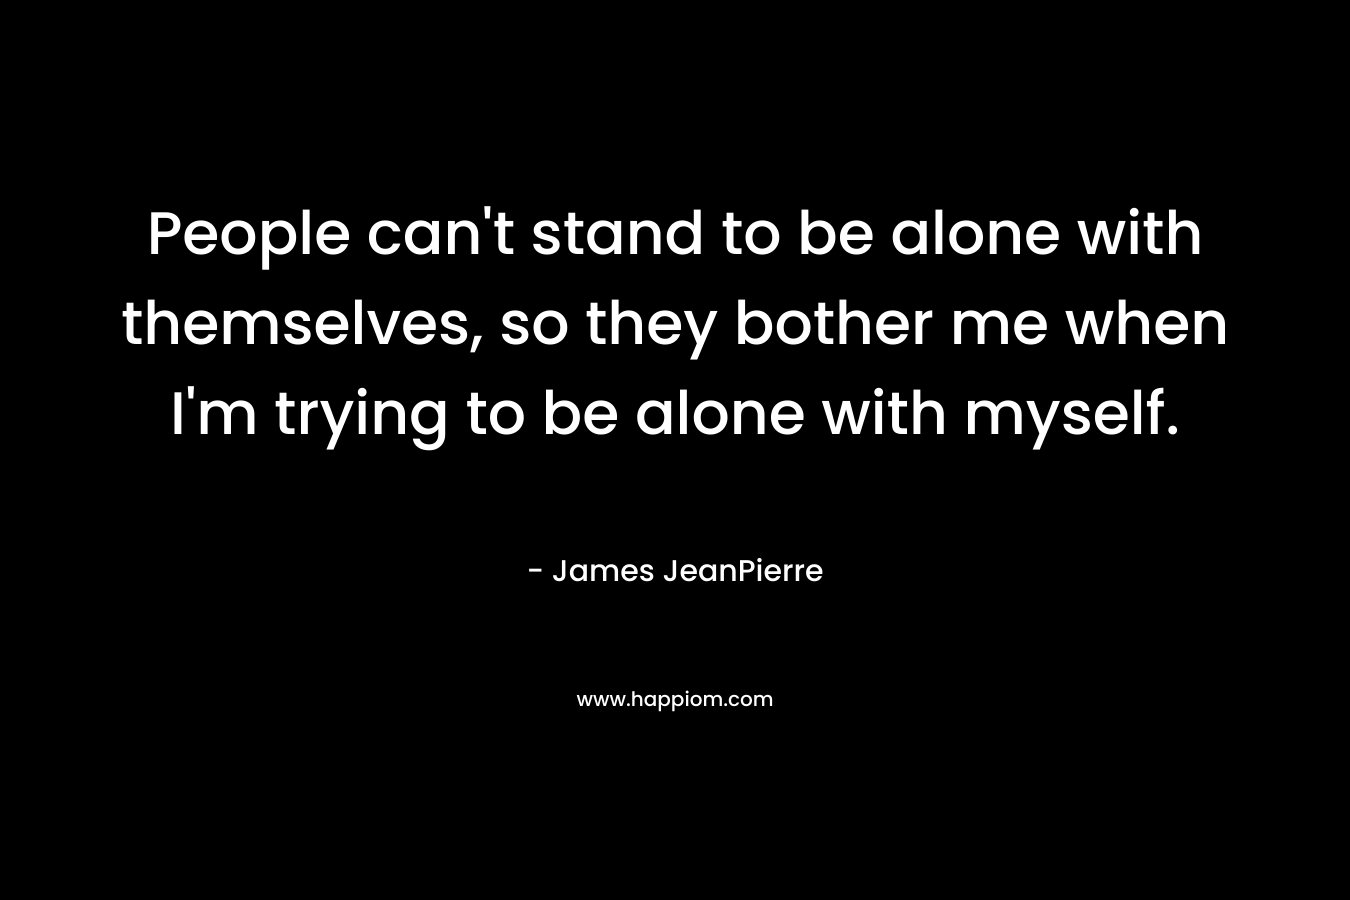 People can’t stand to be alone with themselves, so they bother me when I’m trying to be alone with myself. – James JeanPierre